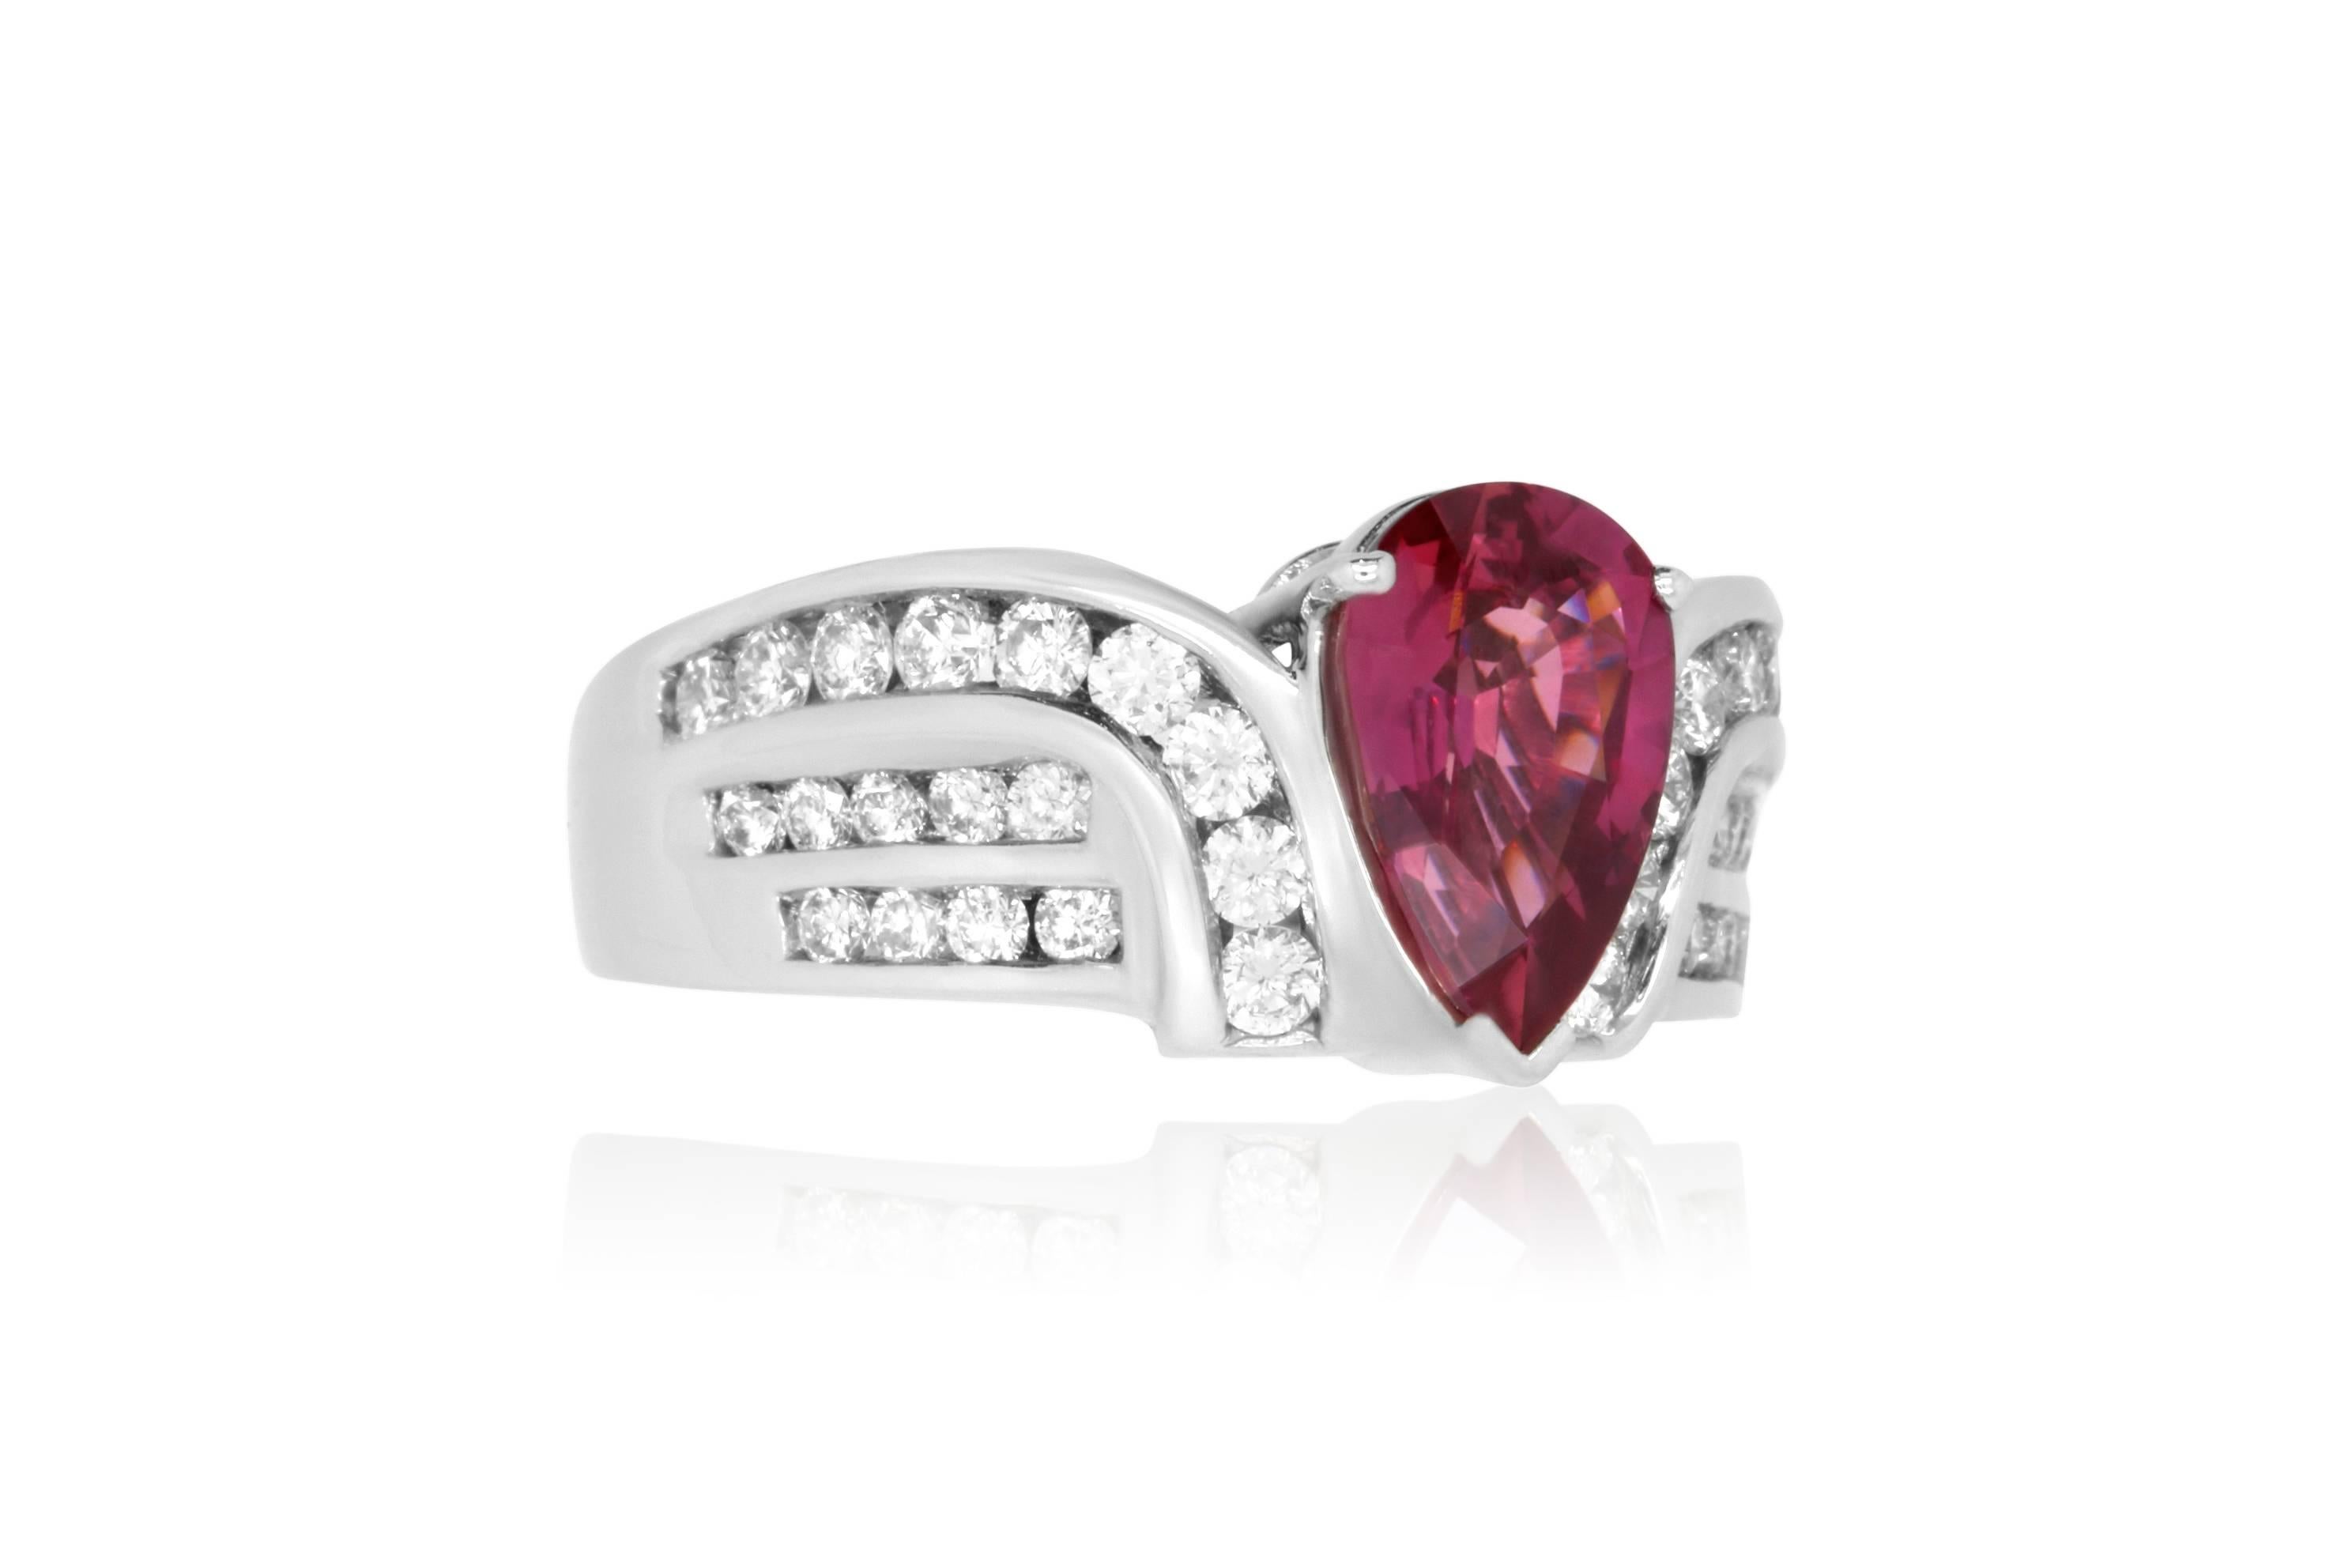 An extremely unique colored Pink Ruby

Material: 14k White Gold
Gemstones: 1.97 Pear Shaped Ruby
Diamonds: Brilliant Round White Diamonds at 0.90 Carats. SI Clarity / H-I Color. 
Ring Size: 6.75. Alberto offers complimentary sizing on all